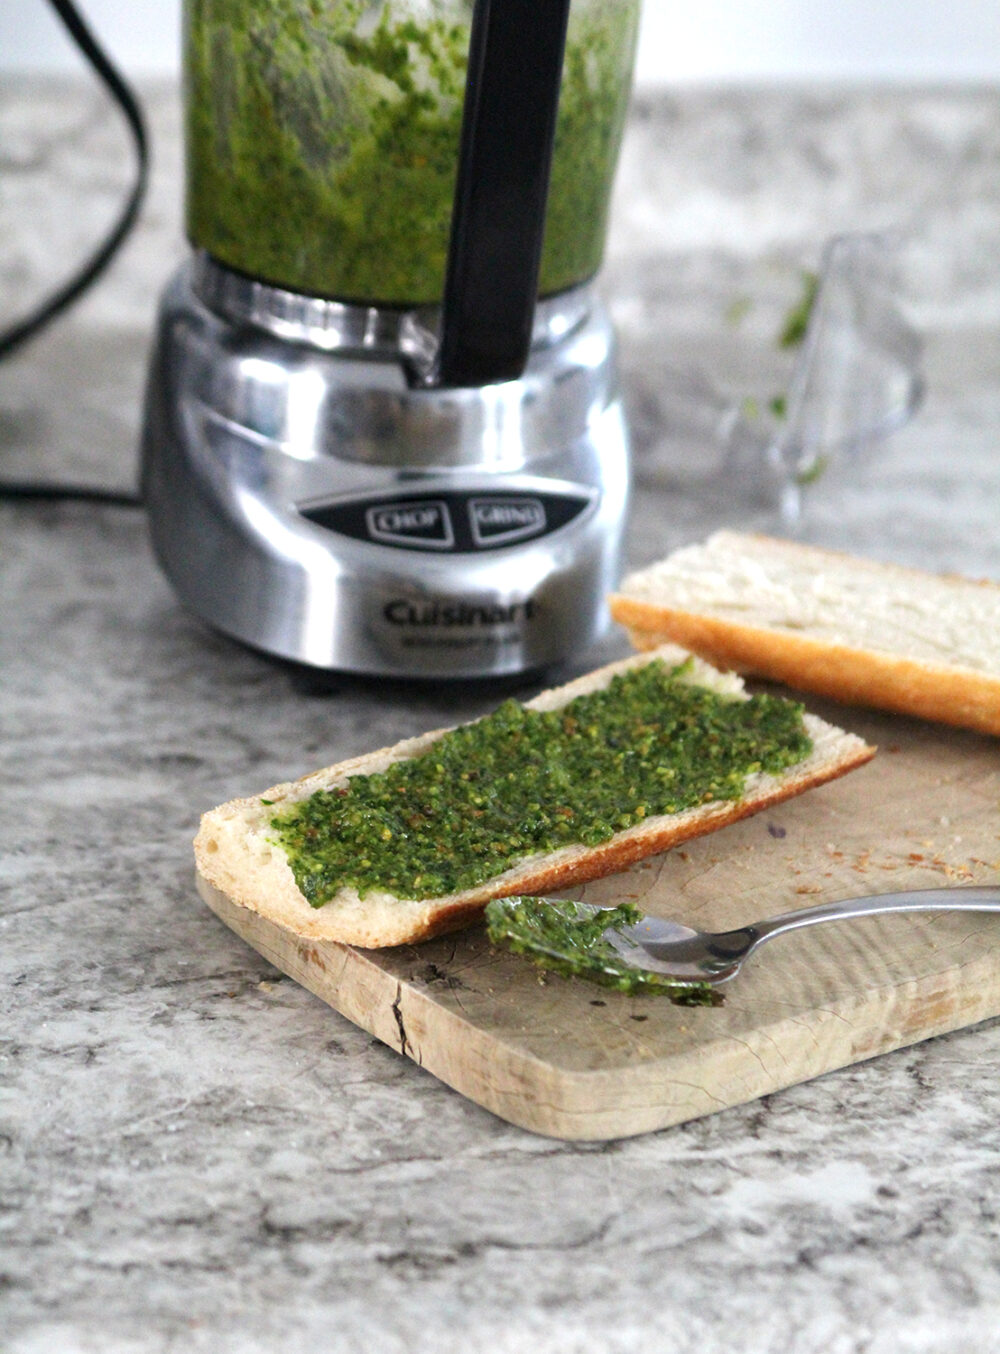 Green pesto with brown specks is spread on bread that sits on a wooden cutting board. A spoon with pesto on it sits nearby. A mini food processor sits in the background.